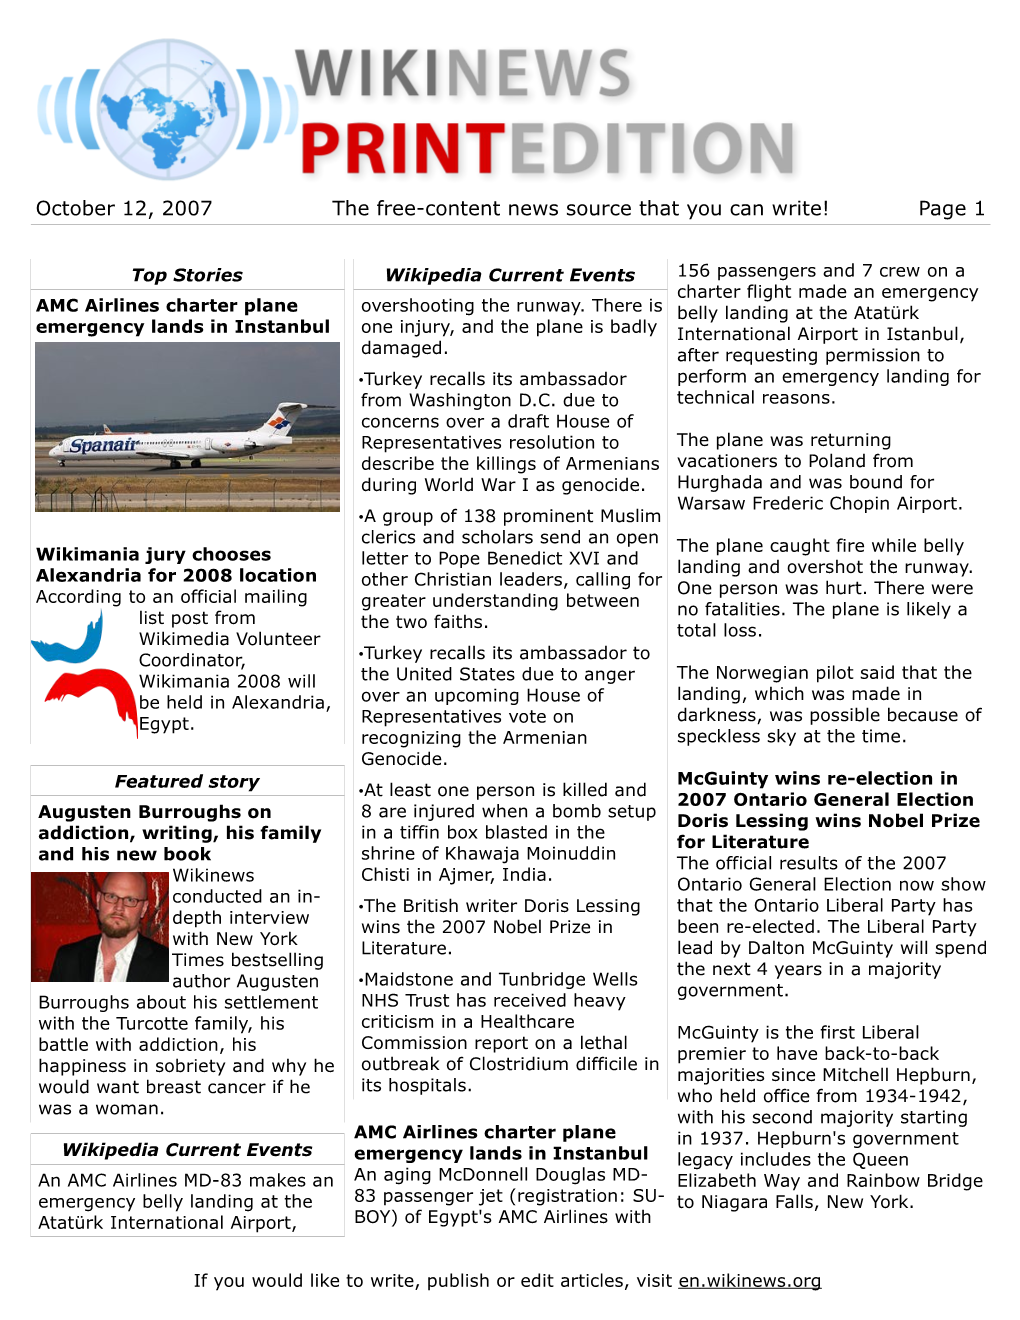 October 12, 2007 the Free-Content News Source That You Can Write! Page 1